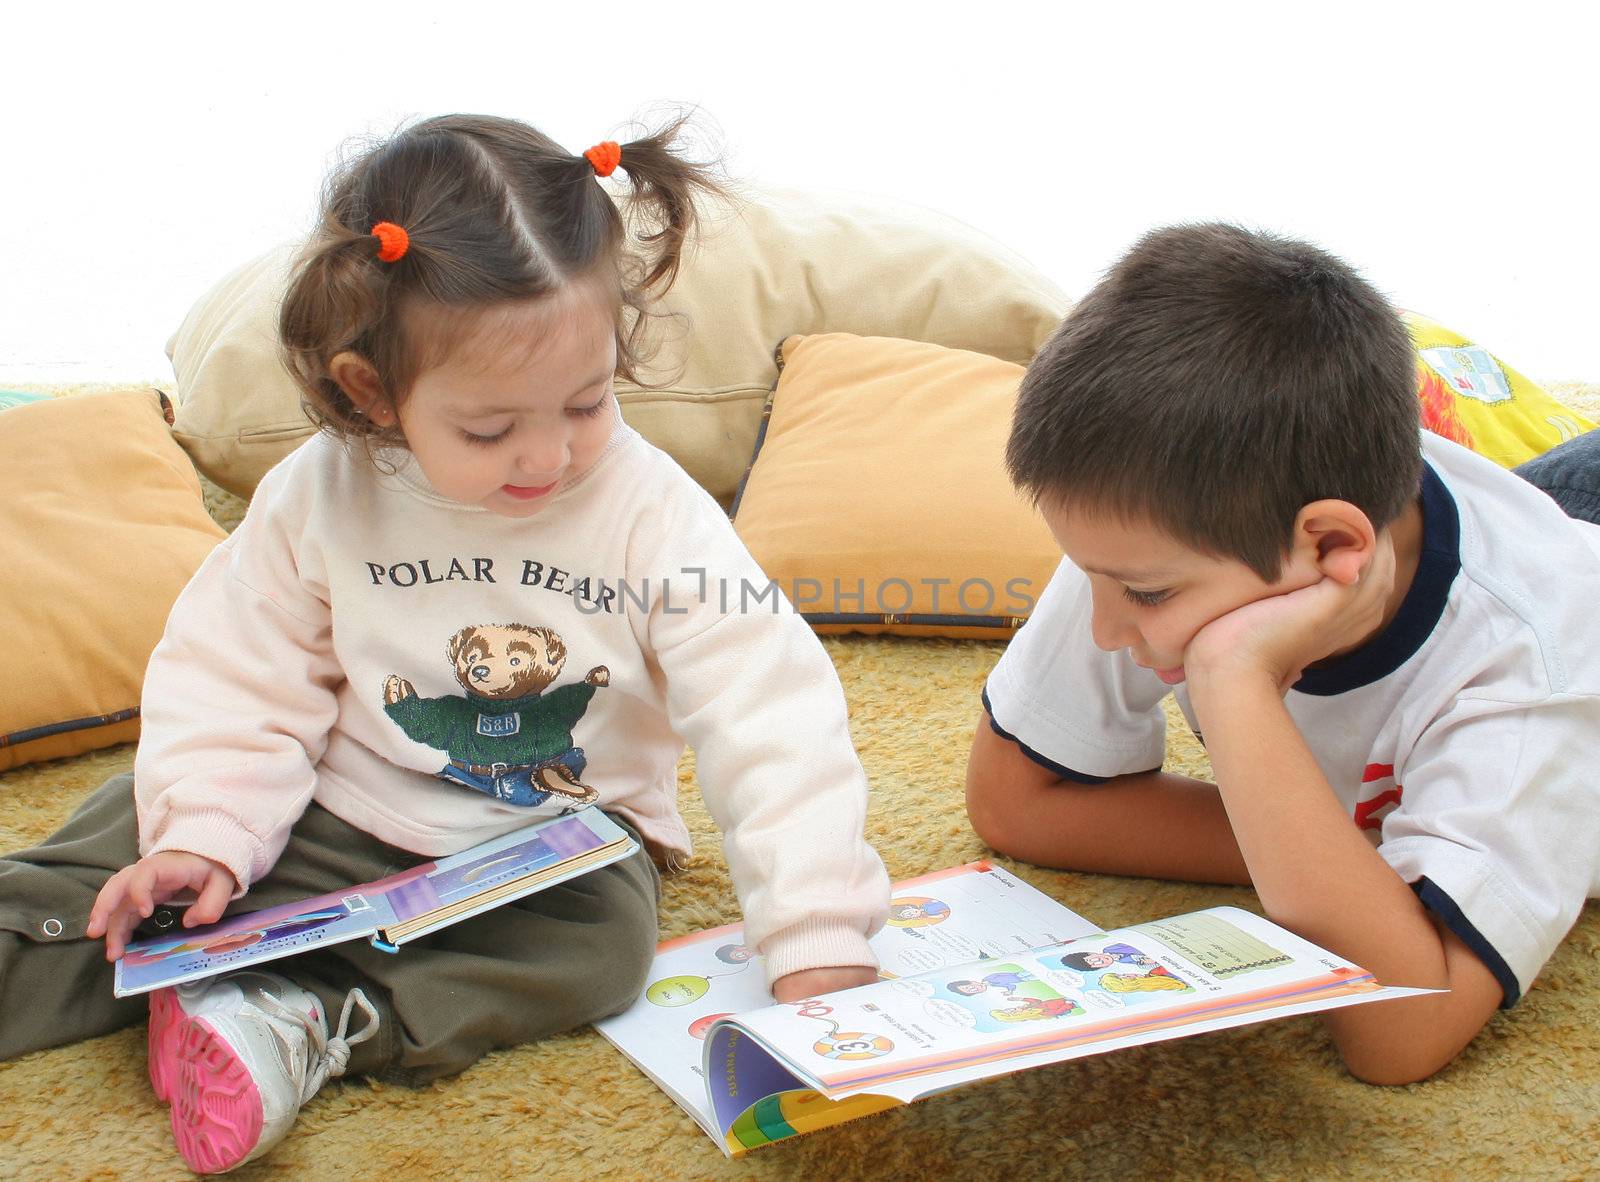 Brother and sister reading books on the floor by Erdosain